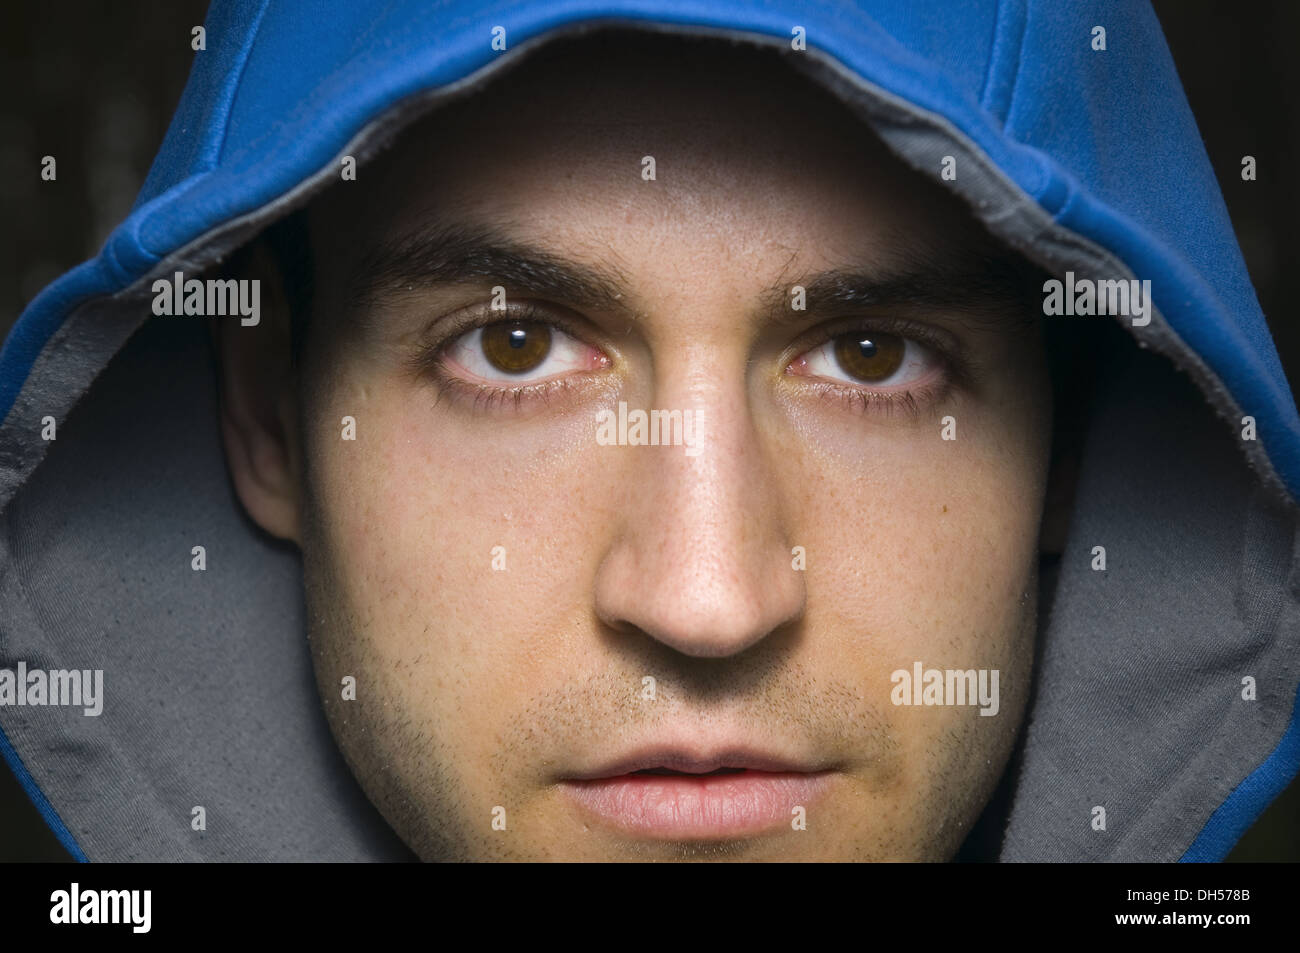 face of man with blue hood Stock Photo - Alamy